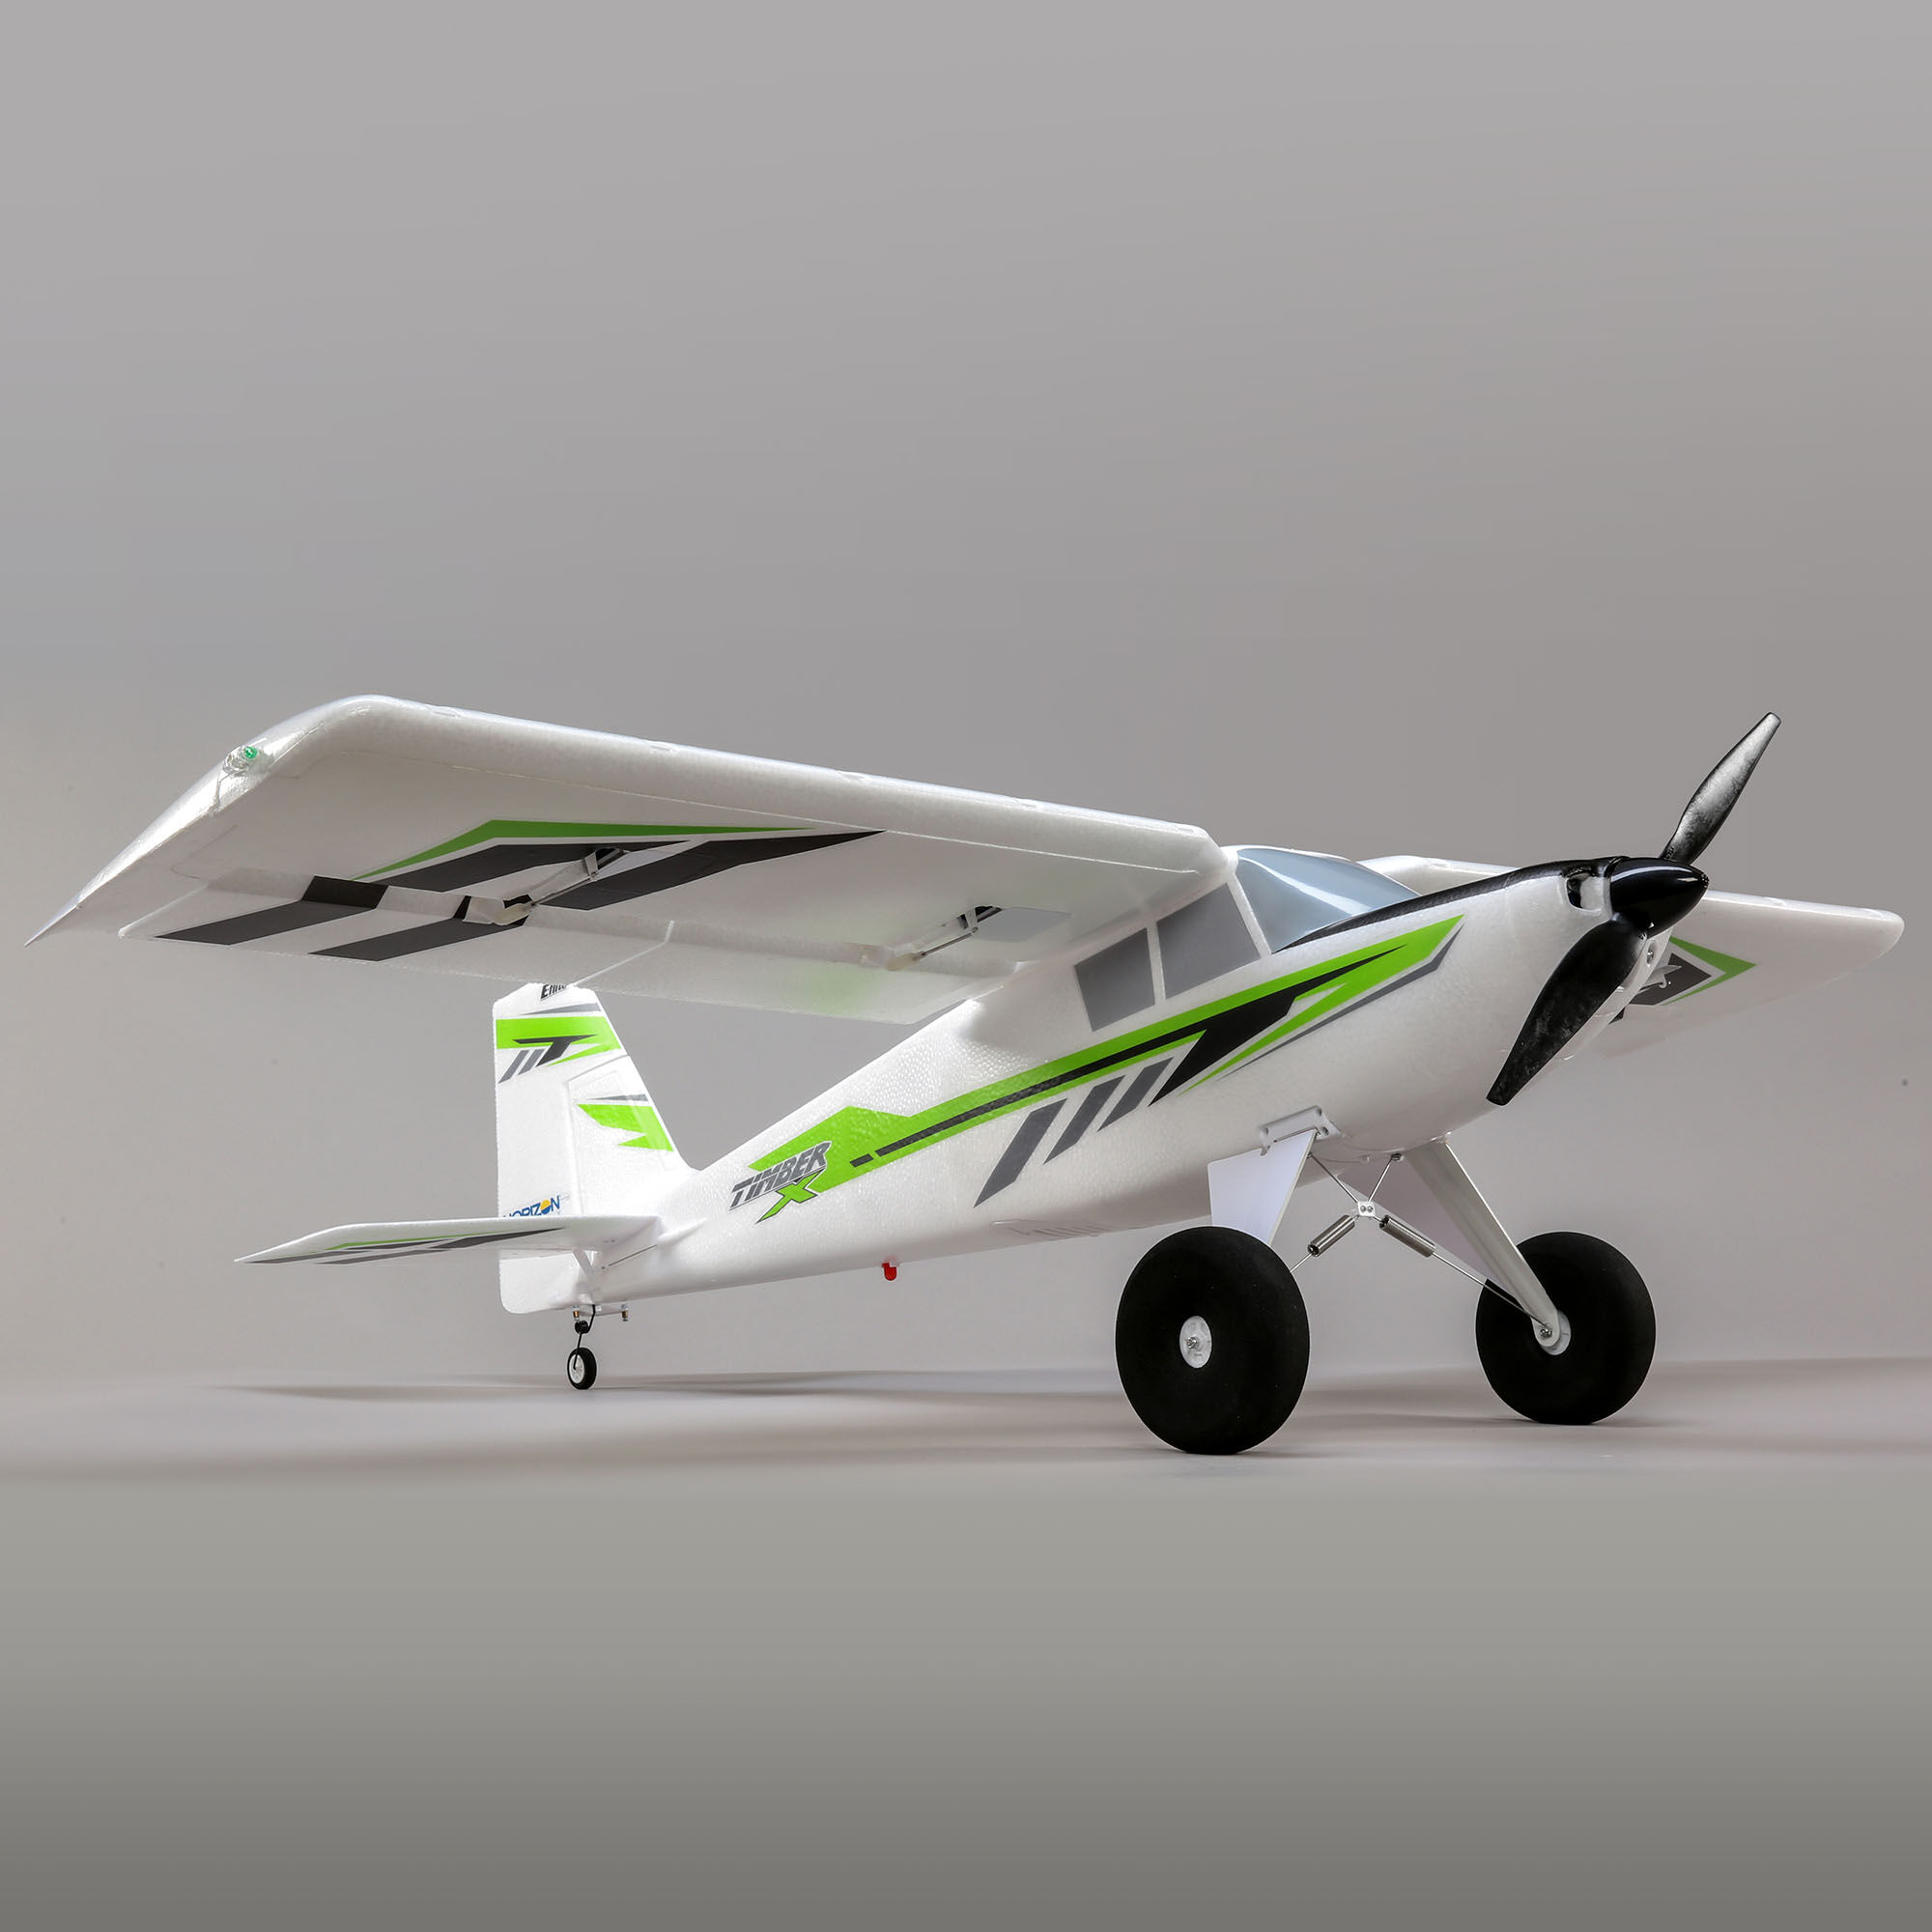 E-flite Timber X 1.2m BNF Basic with 